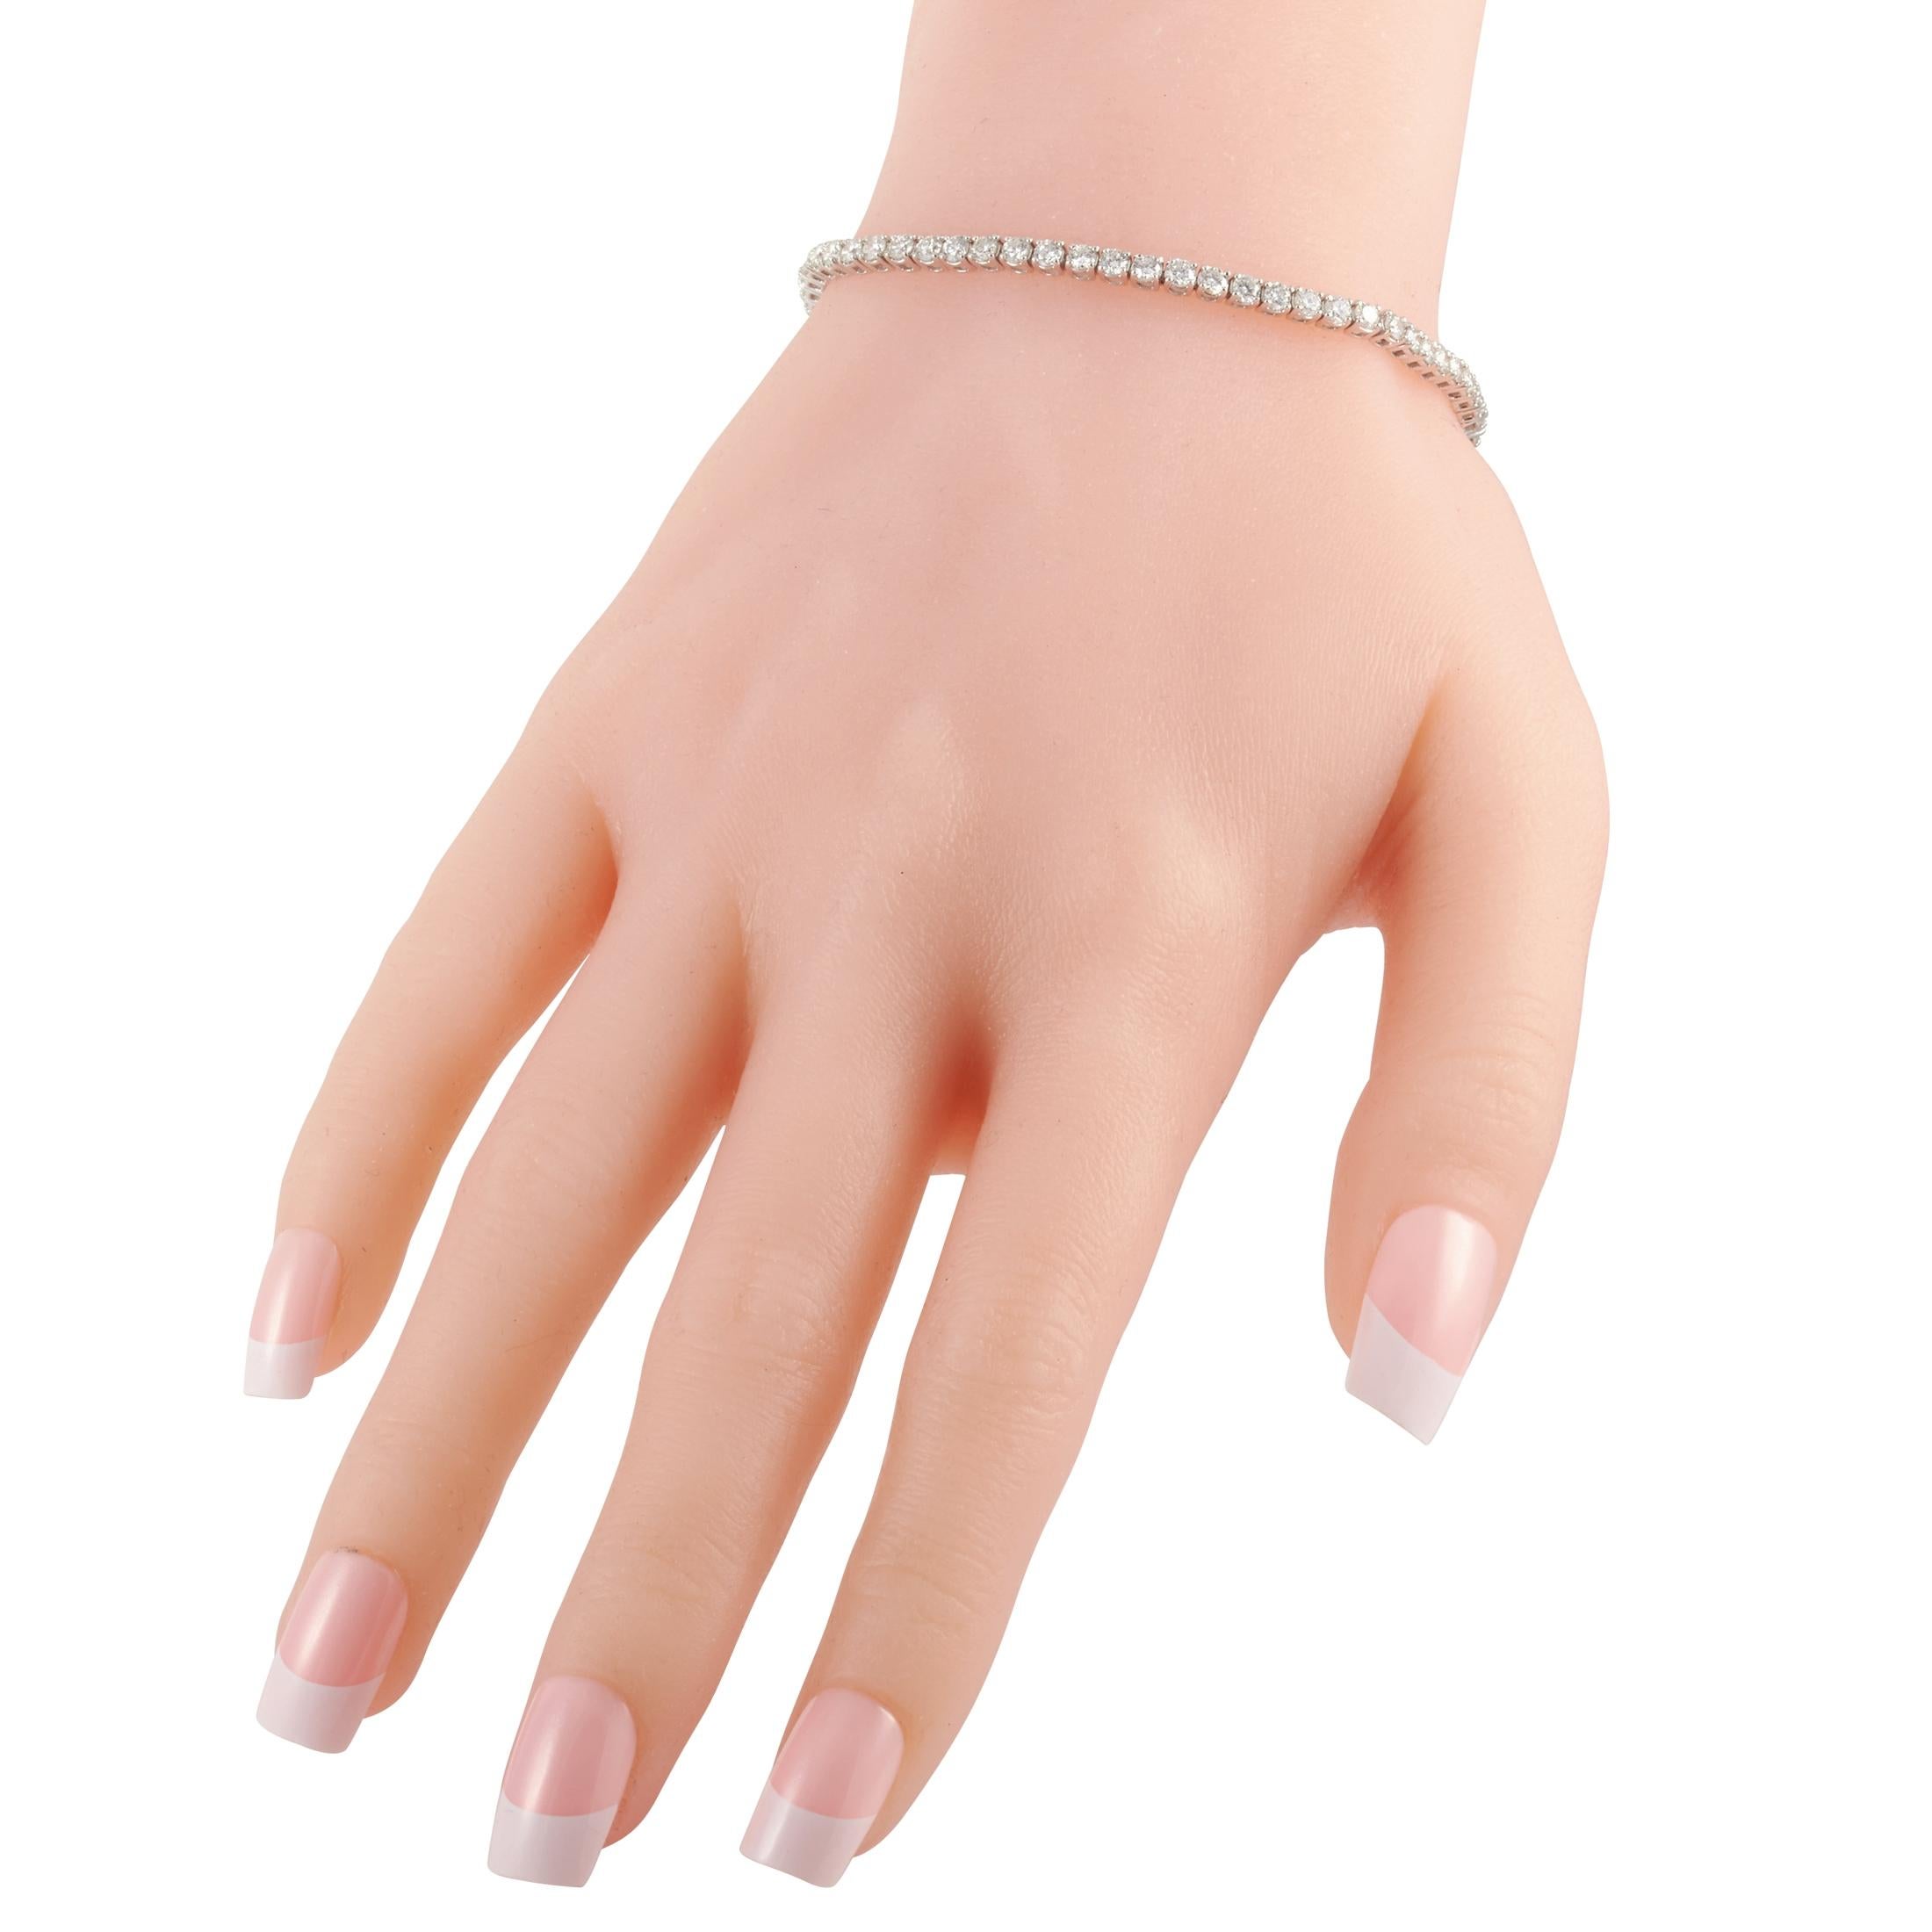 This LB Exclusive tennis bracelet is made of 14K white gold and embellished with diamonds that amount to 4.92 carats. The bracelet weighs 8 grams and measures 7.50” in length.
 
 Offered in brand new condition, this jewelry piece includes a gift